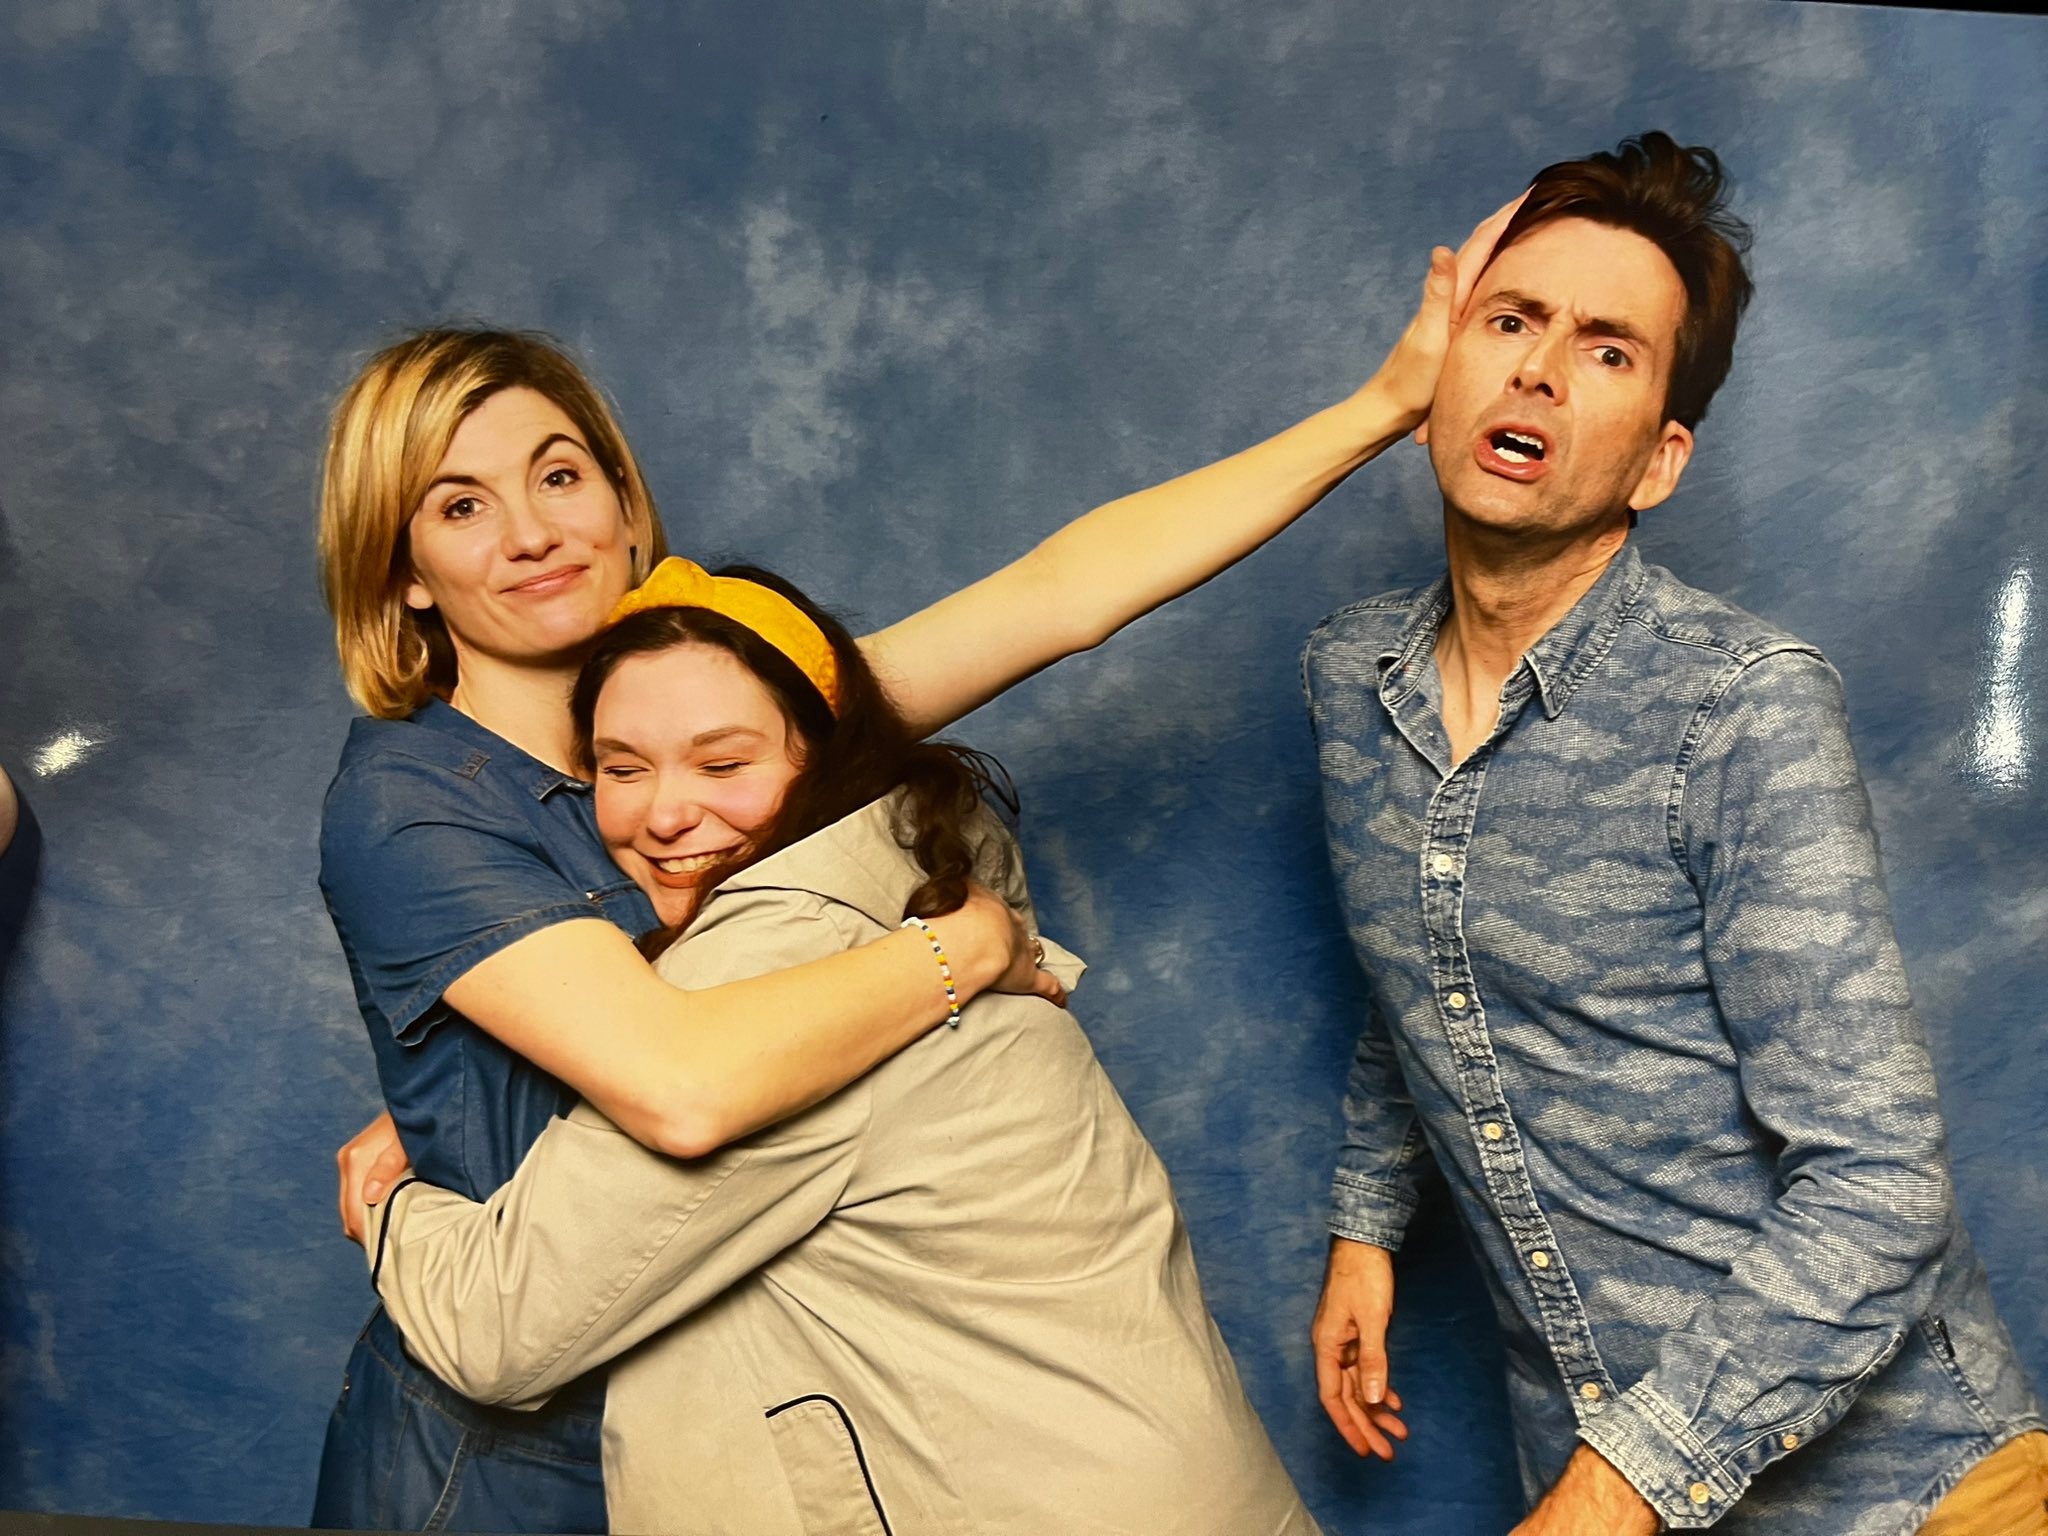 David Tennant with Jodie Whittaker at London Comic Con fan convention - Sunday 20th November 2022